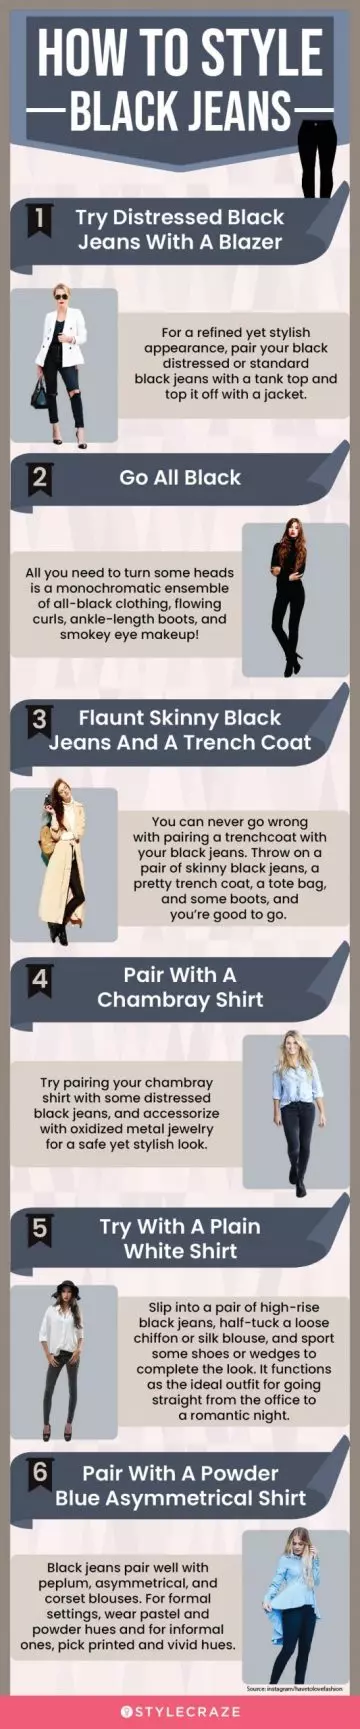 how to style black jeans (infographic)